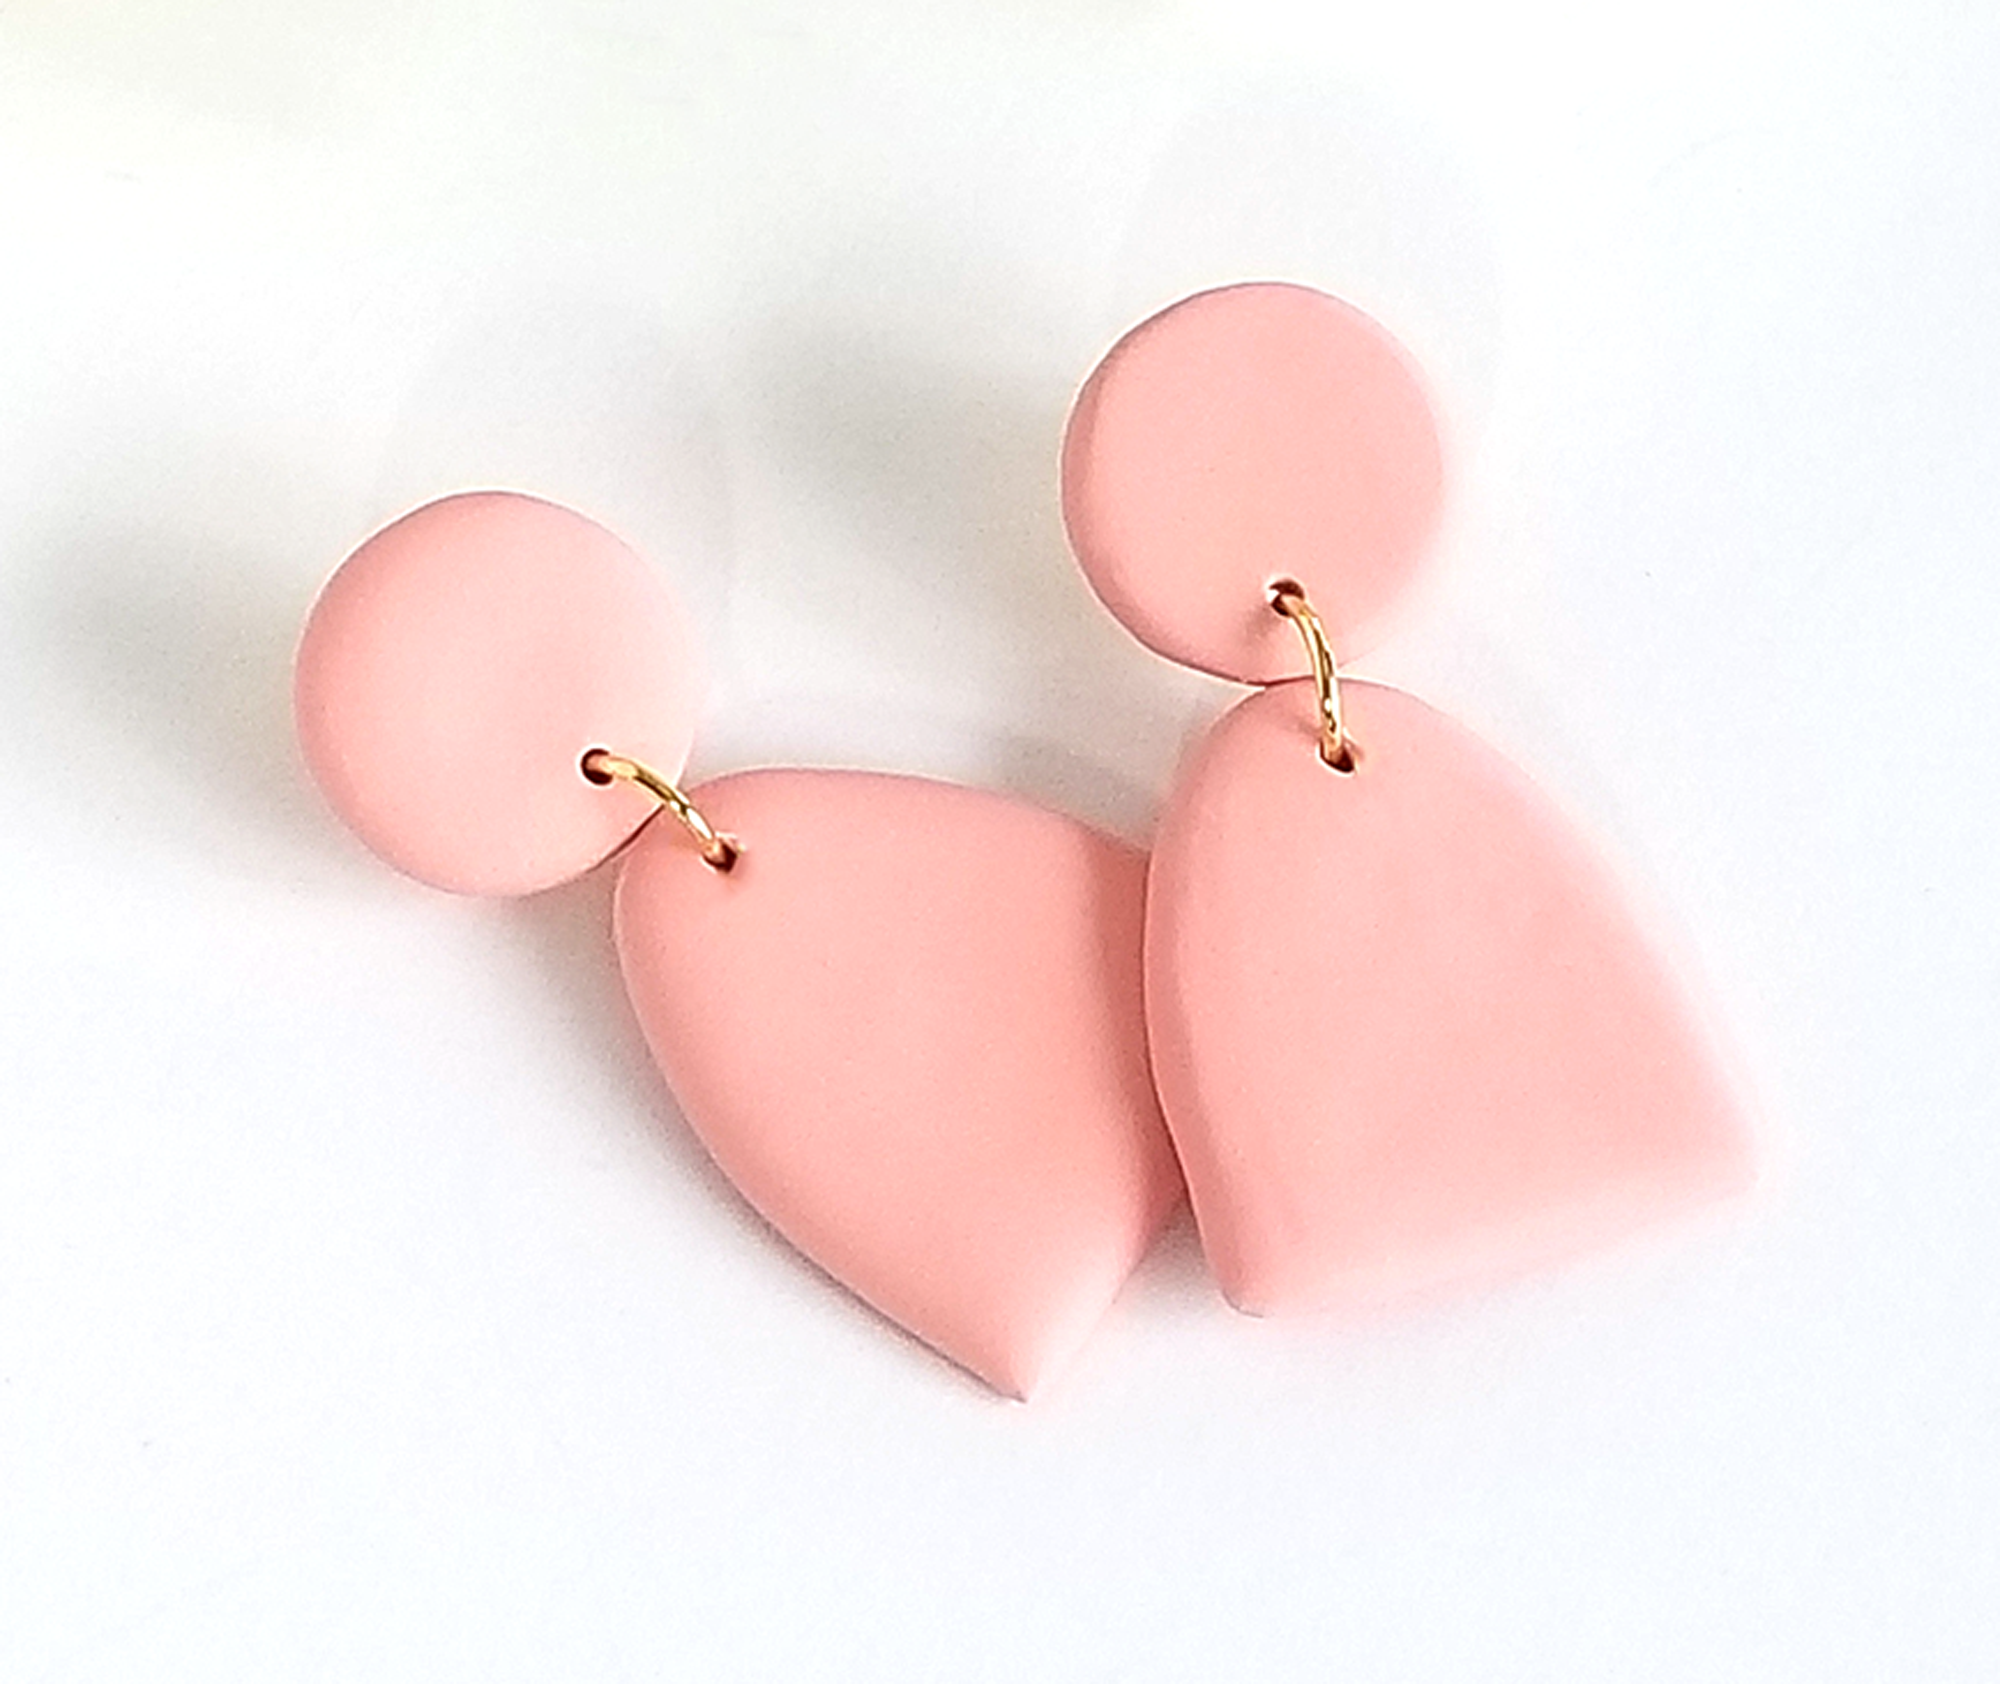 Tan and Peach Brass Charm Polymer Clay Statement Earring